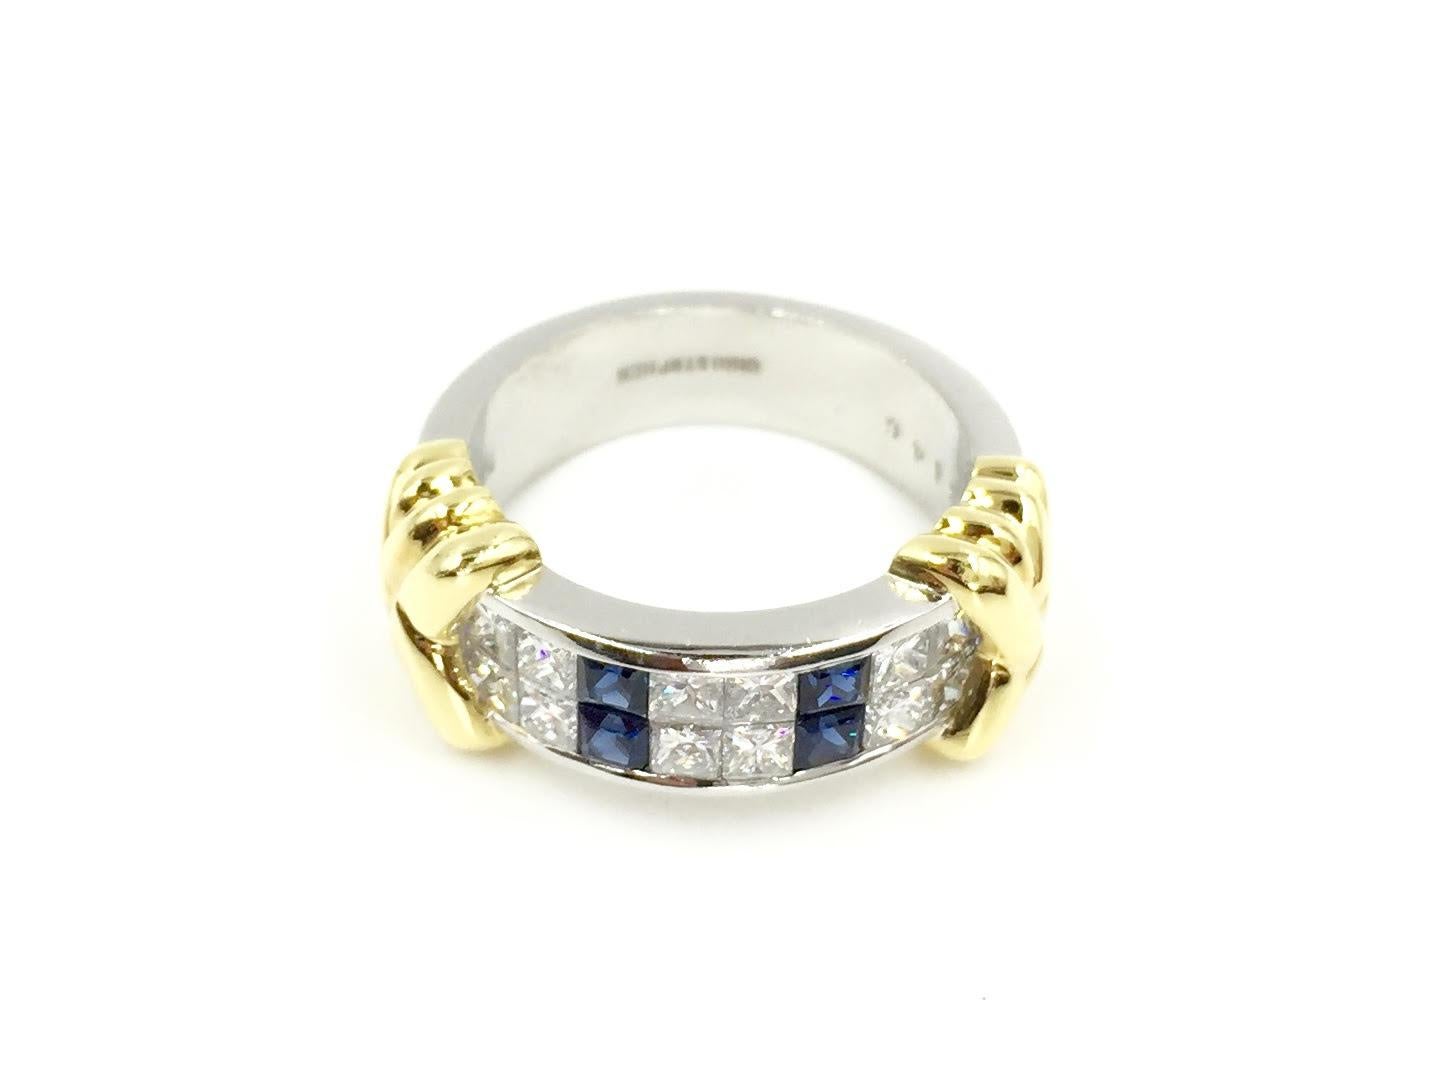 A great find for a sleek and sophisticated wide band. Perfect for every day wear as a right hand ring or wedding band. Made by Christopher Designs using .46 carats of high quality vibrant square blue sapphires and 1.07 carats of white brilliant